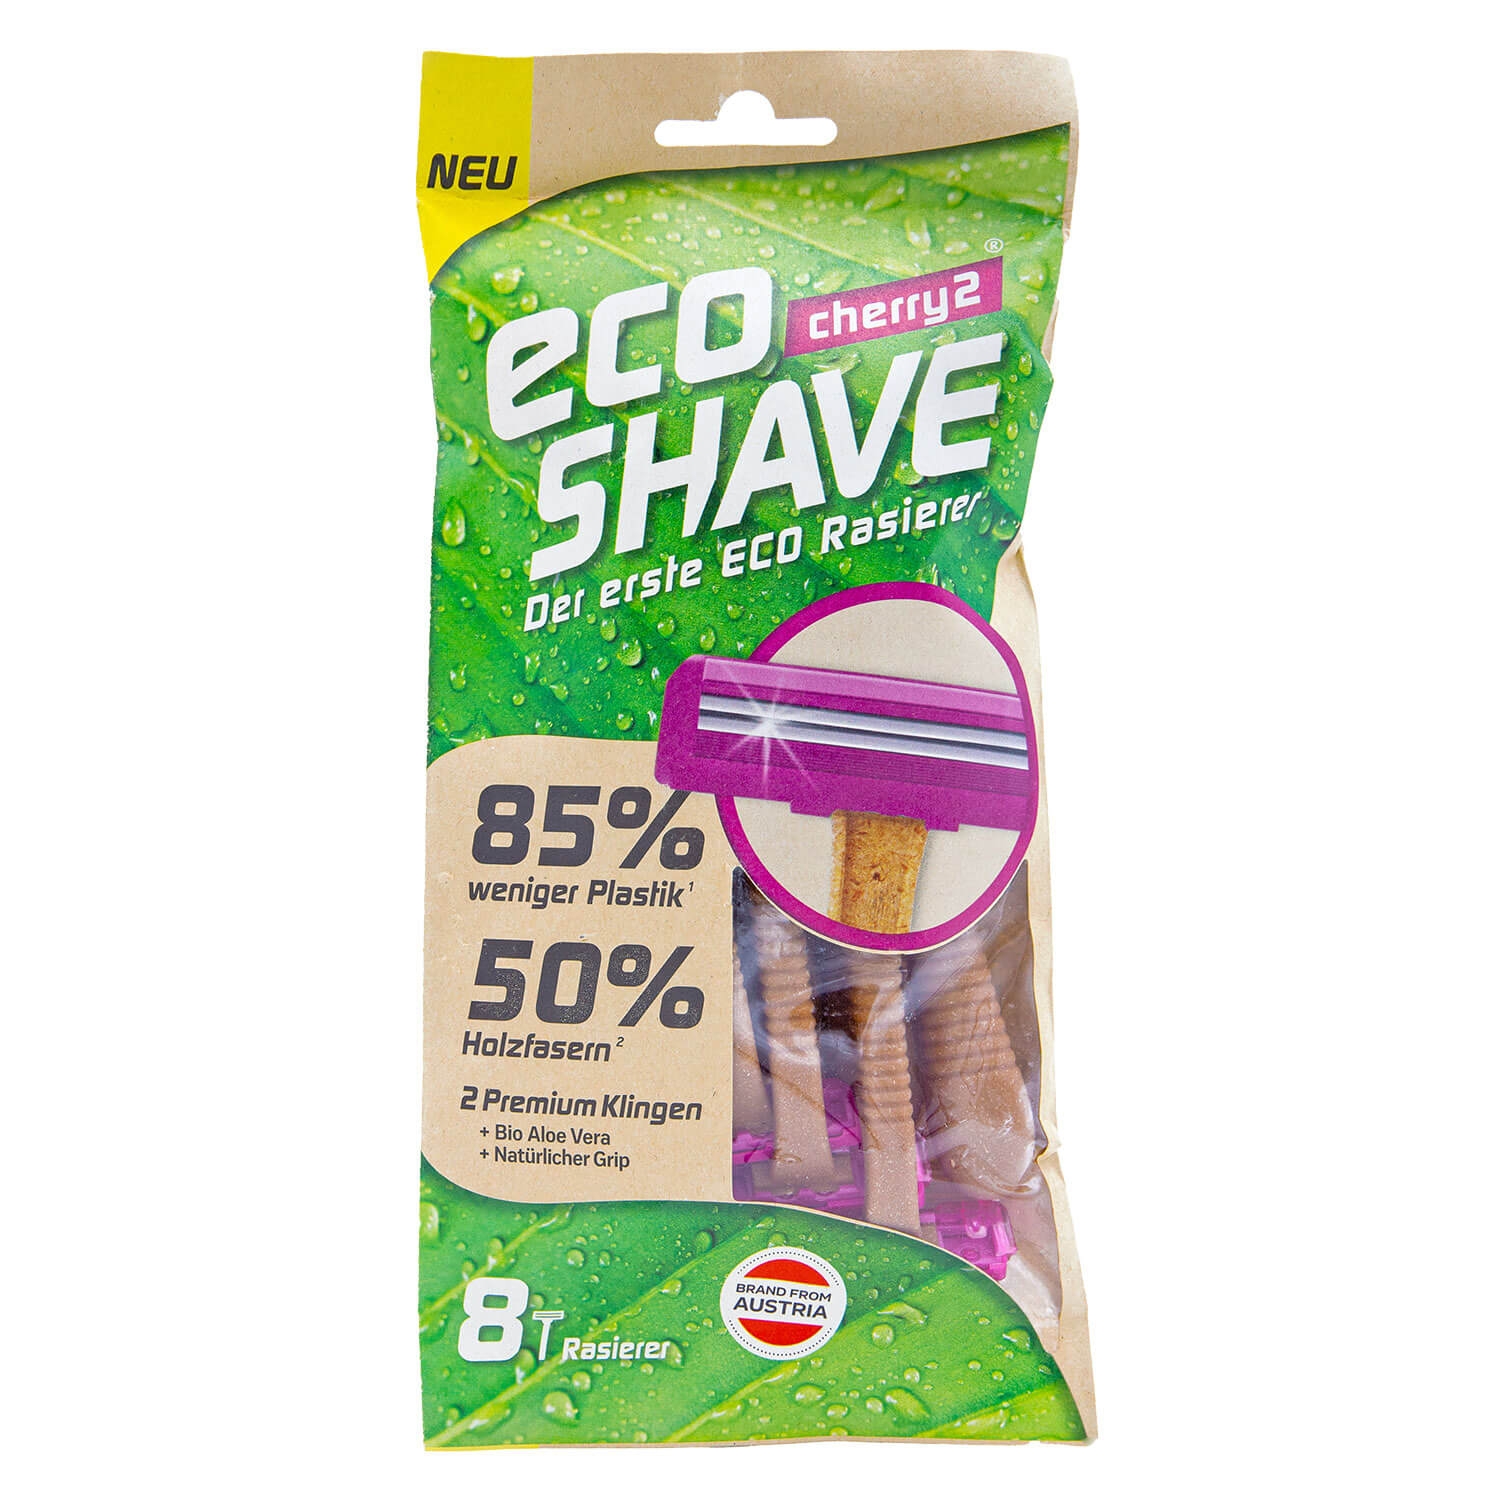 Product image from ecoSHAVE - Cherry 2 Einmalrasierer